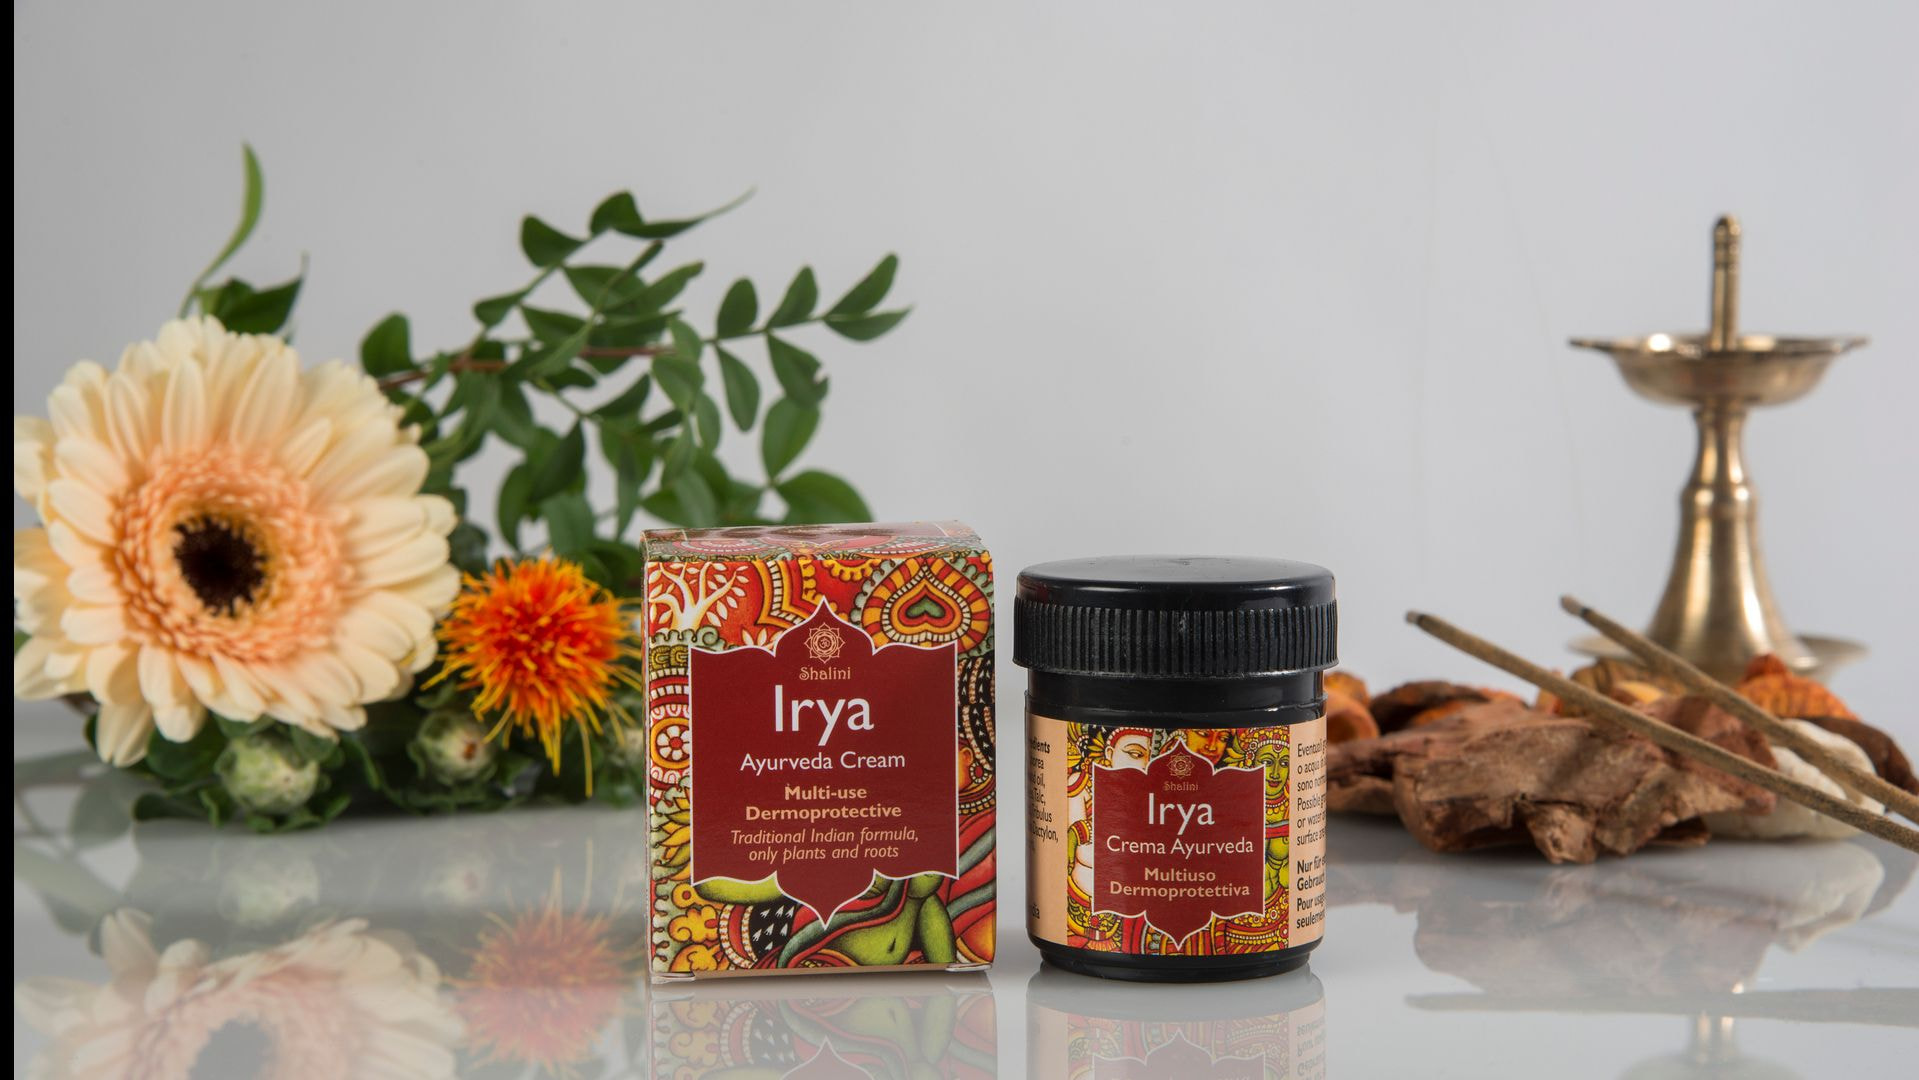 Irya protective cream is an entirely natural skincare product, created from an original Ayurveda formula. Irya is an ideal product for refreshing any skin type. Irya also relieves extremely dry skin, flakiness or redness and is ideal for protecting and strengthening fragile skin.